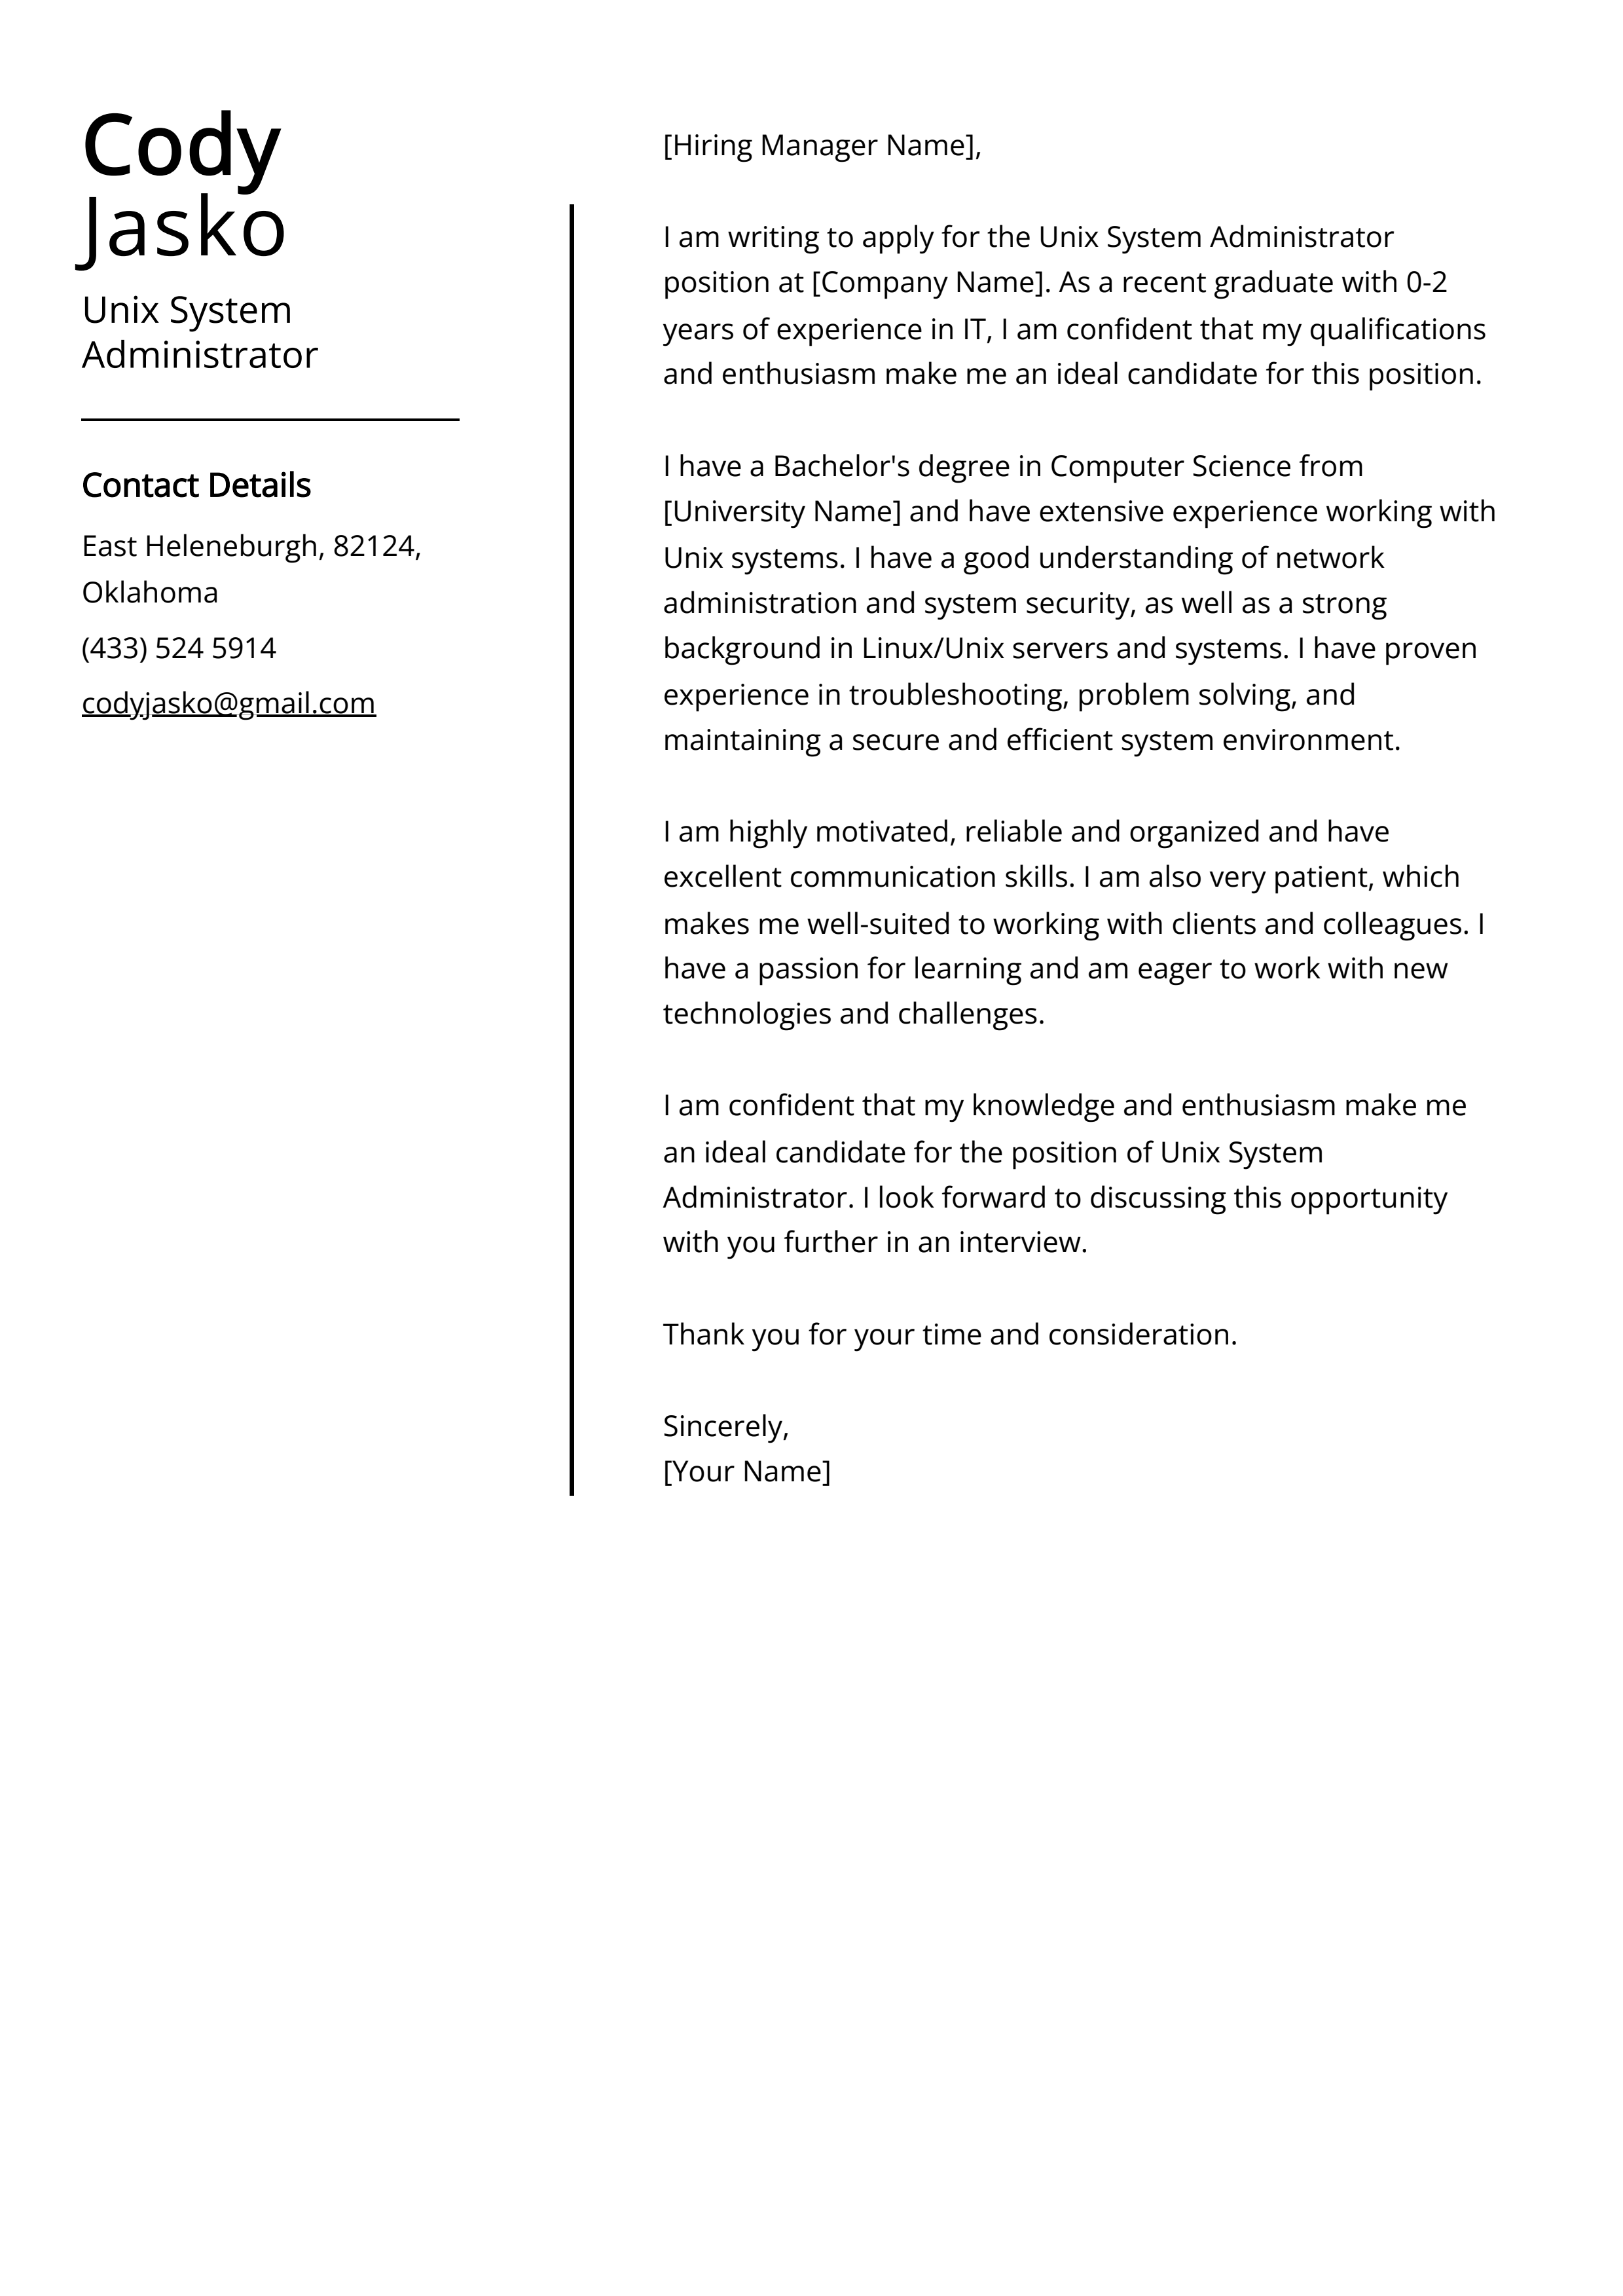 Unix System Administrator Cover Letter Example